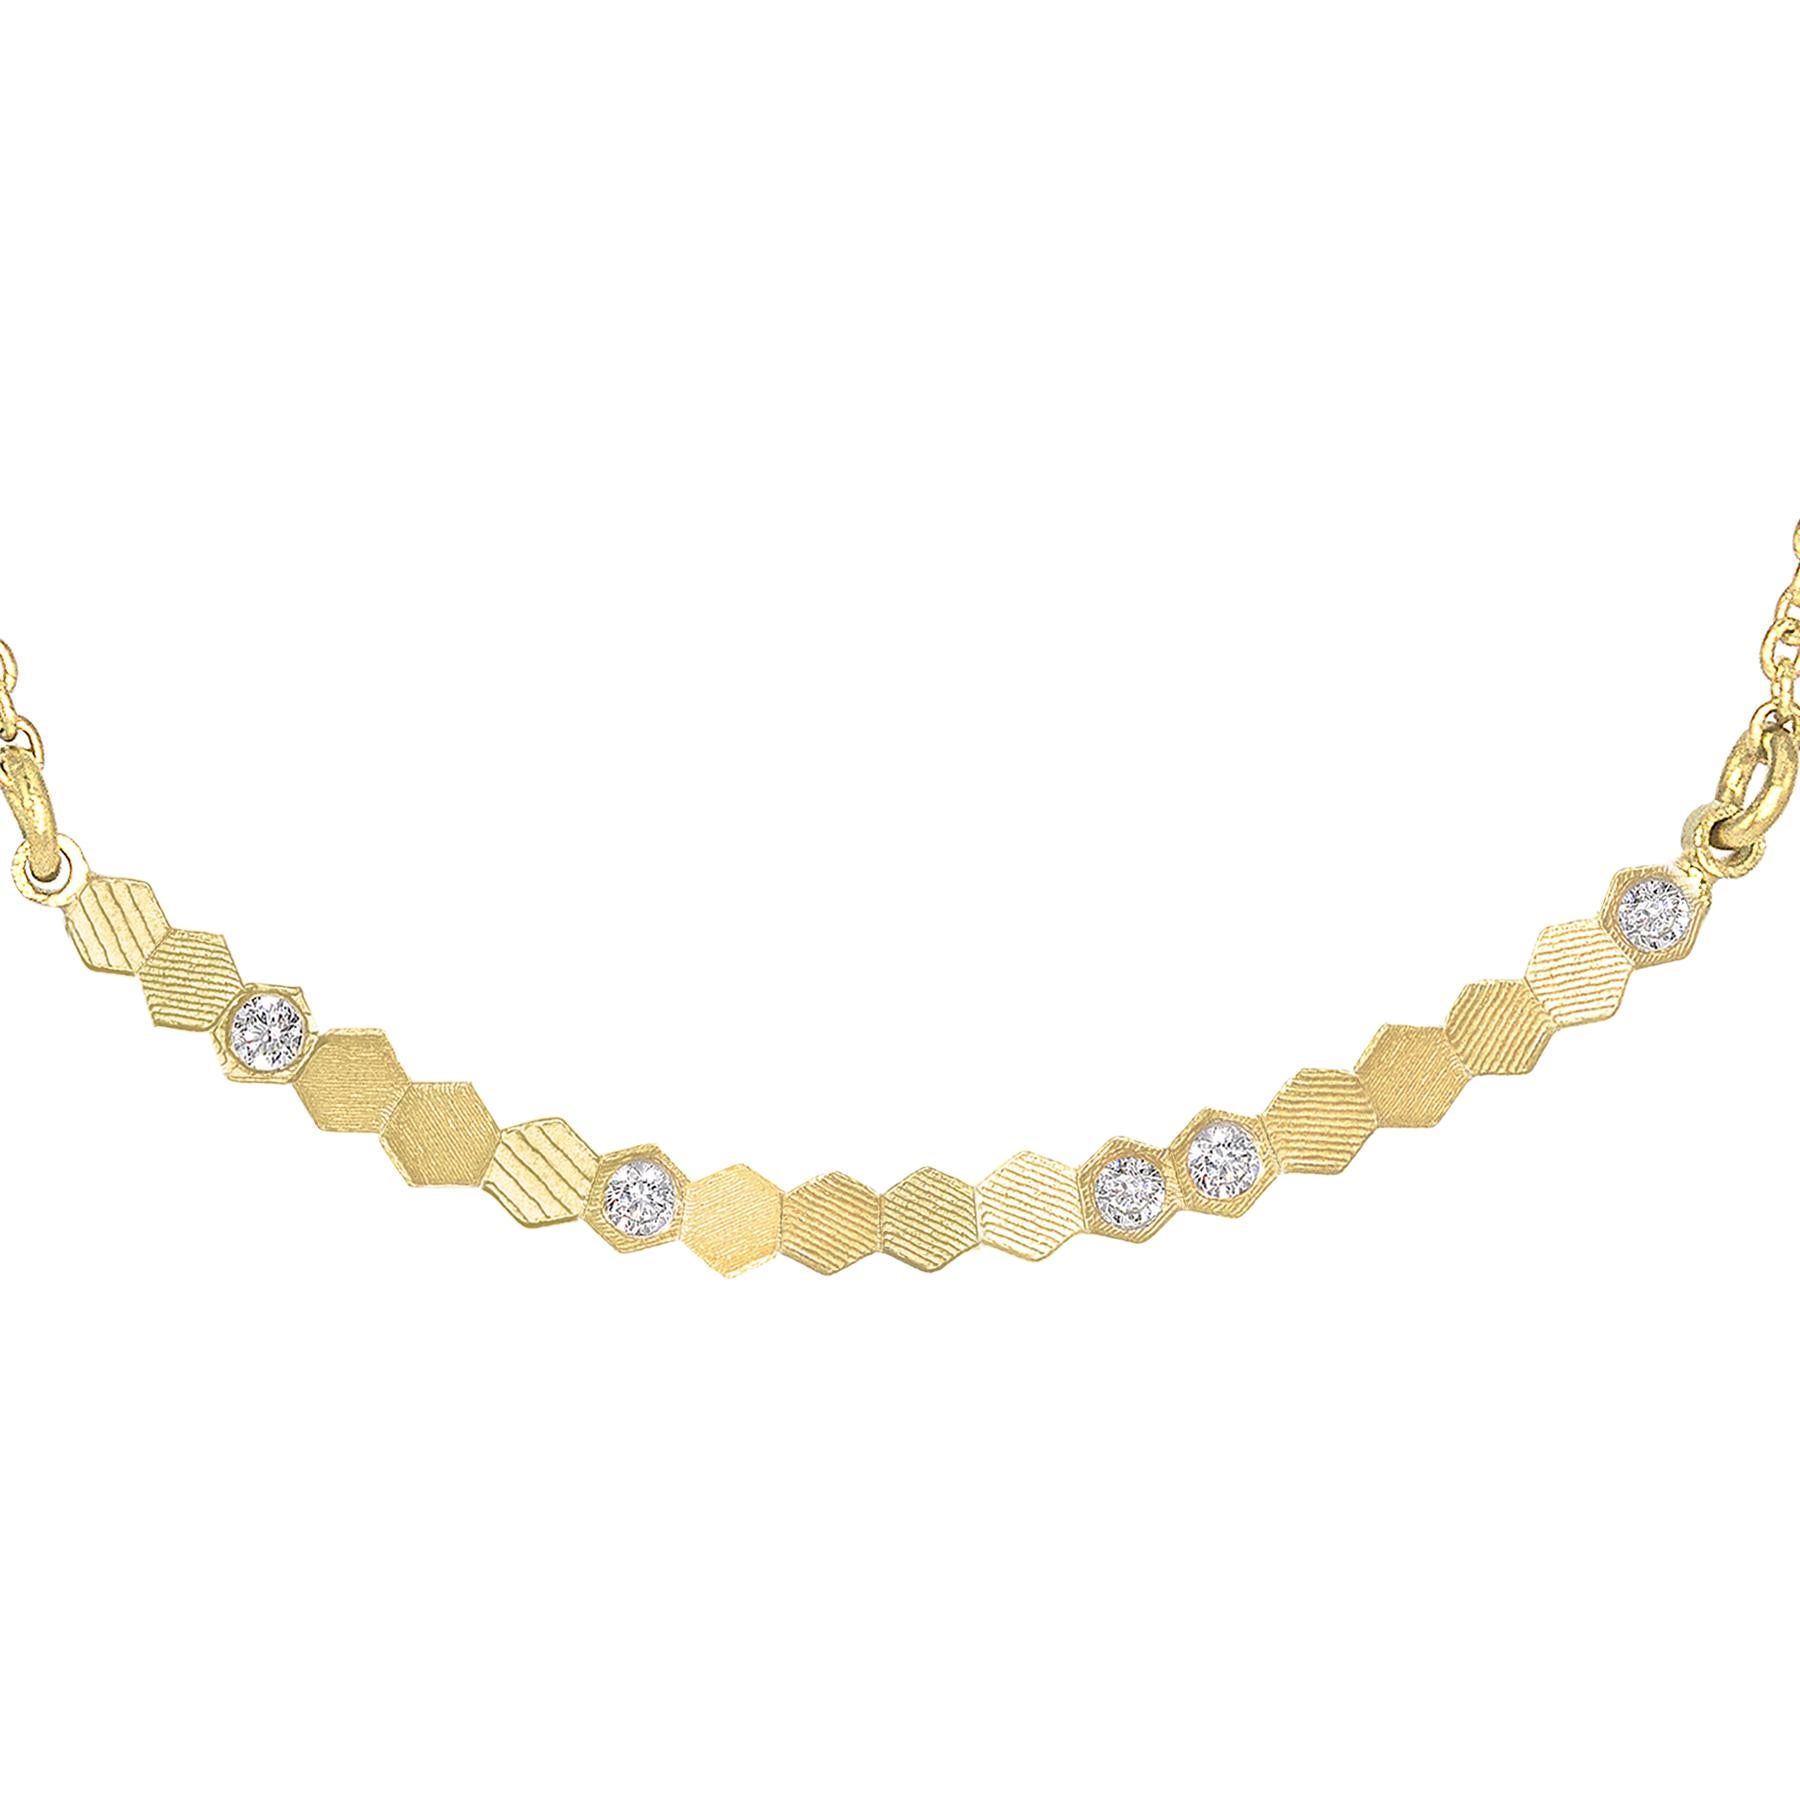 Round Cut Jo Hayes Ward White Diamond Reflective Yellow Gold Curved Bar Necklace